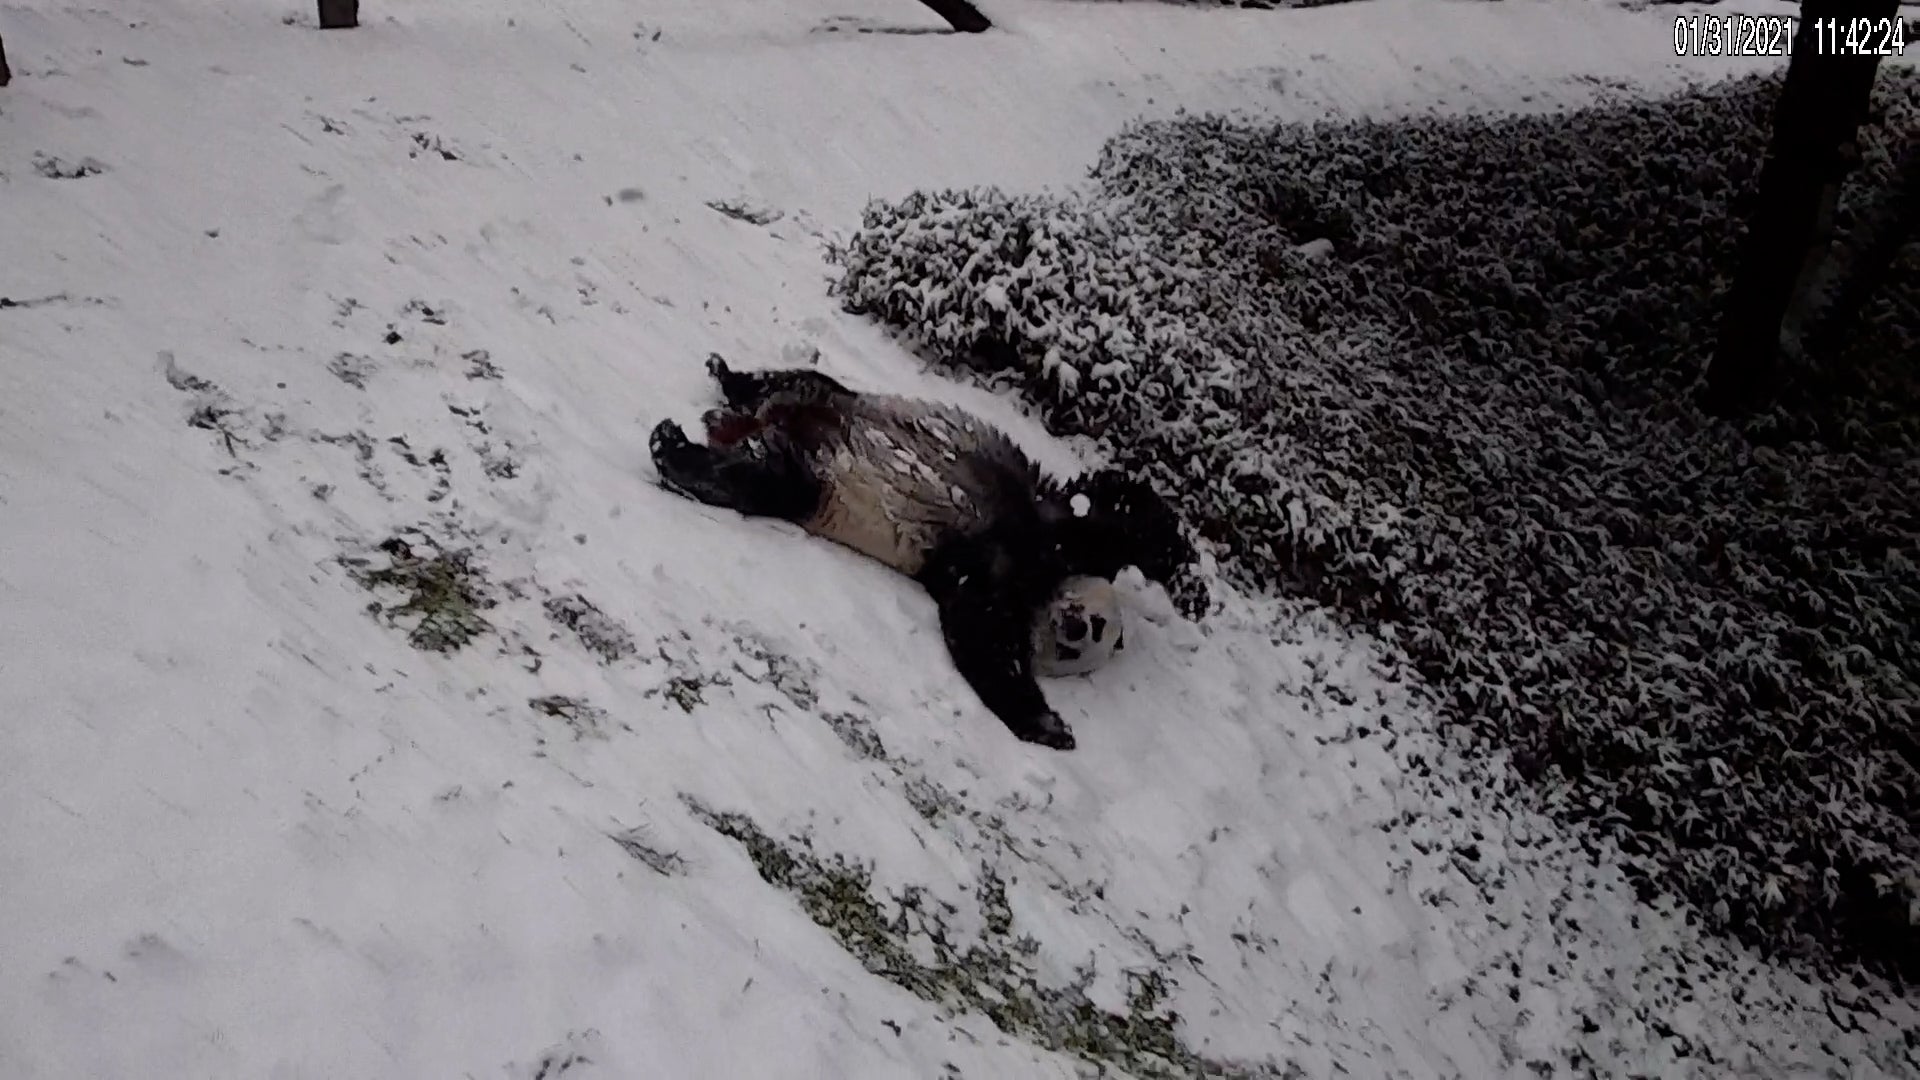 Giant panda Mei Xiang slides on her back down a snowy hill